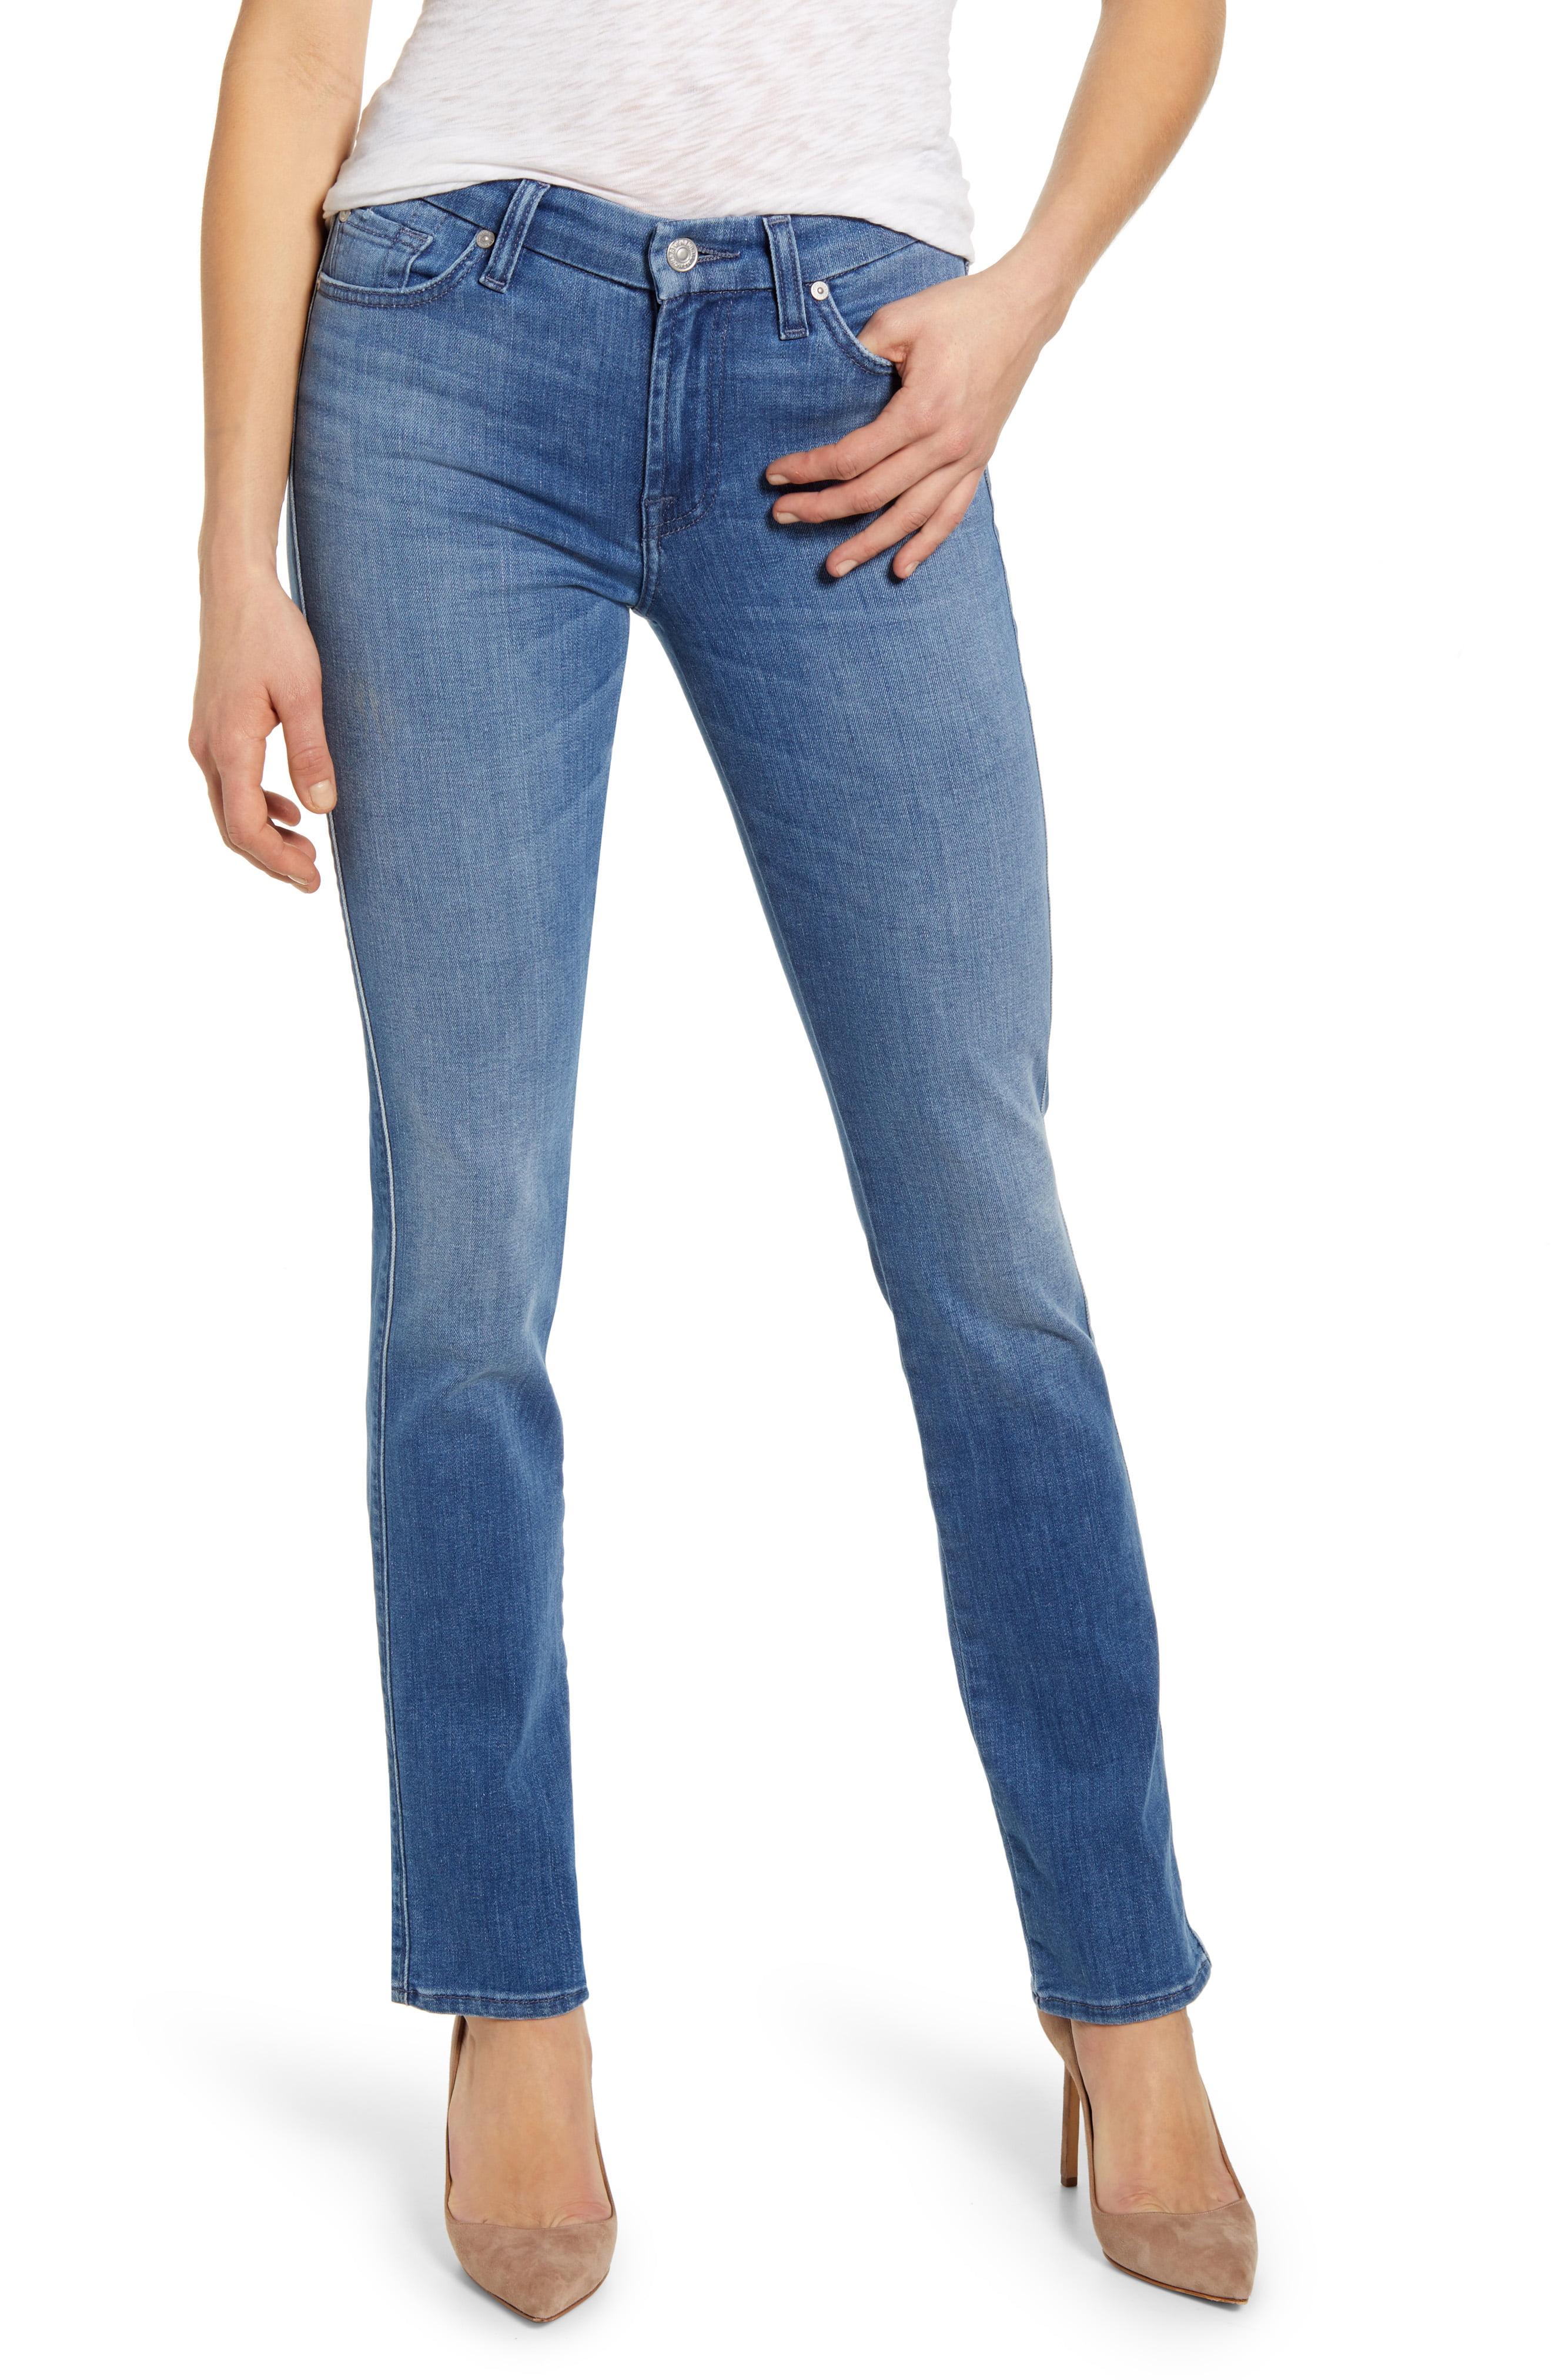 7 For All Mankind Denim 7 For All Mankind Kimmie Straight Leg Jeans in